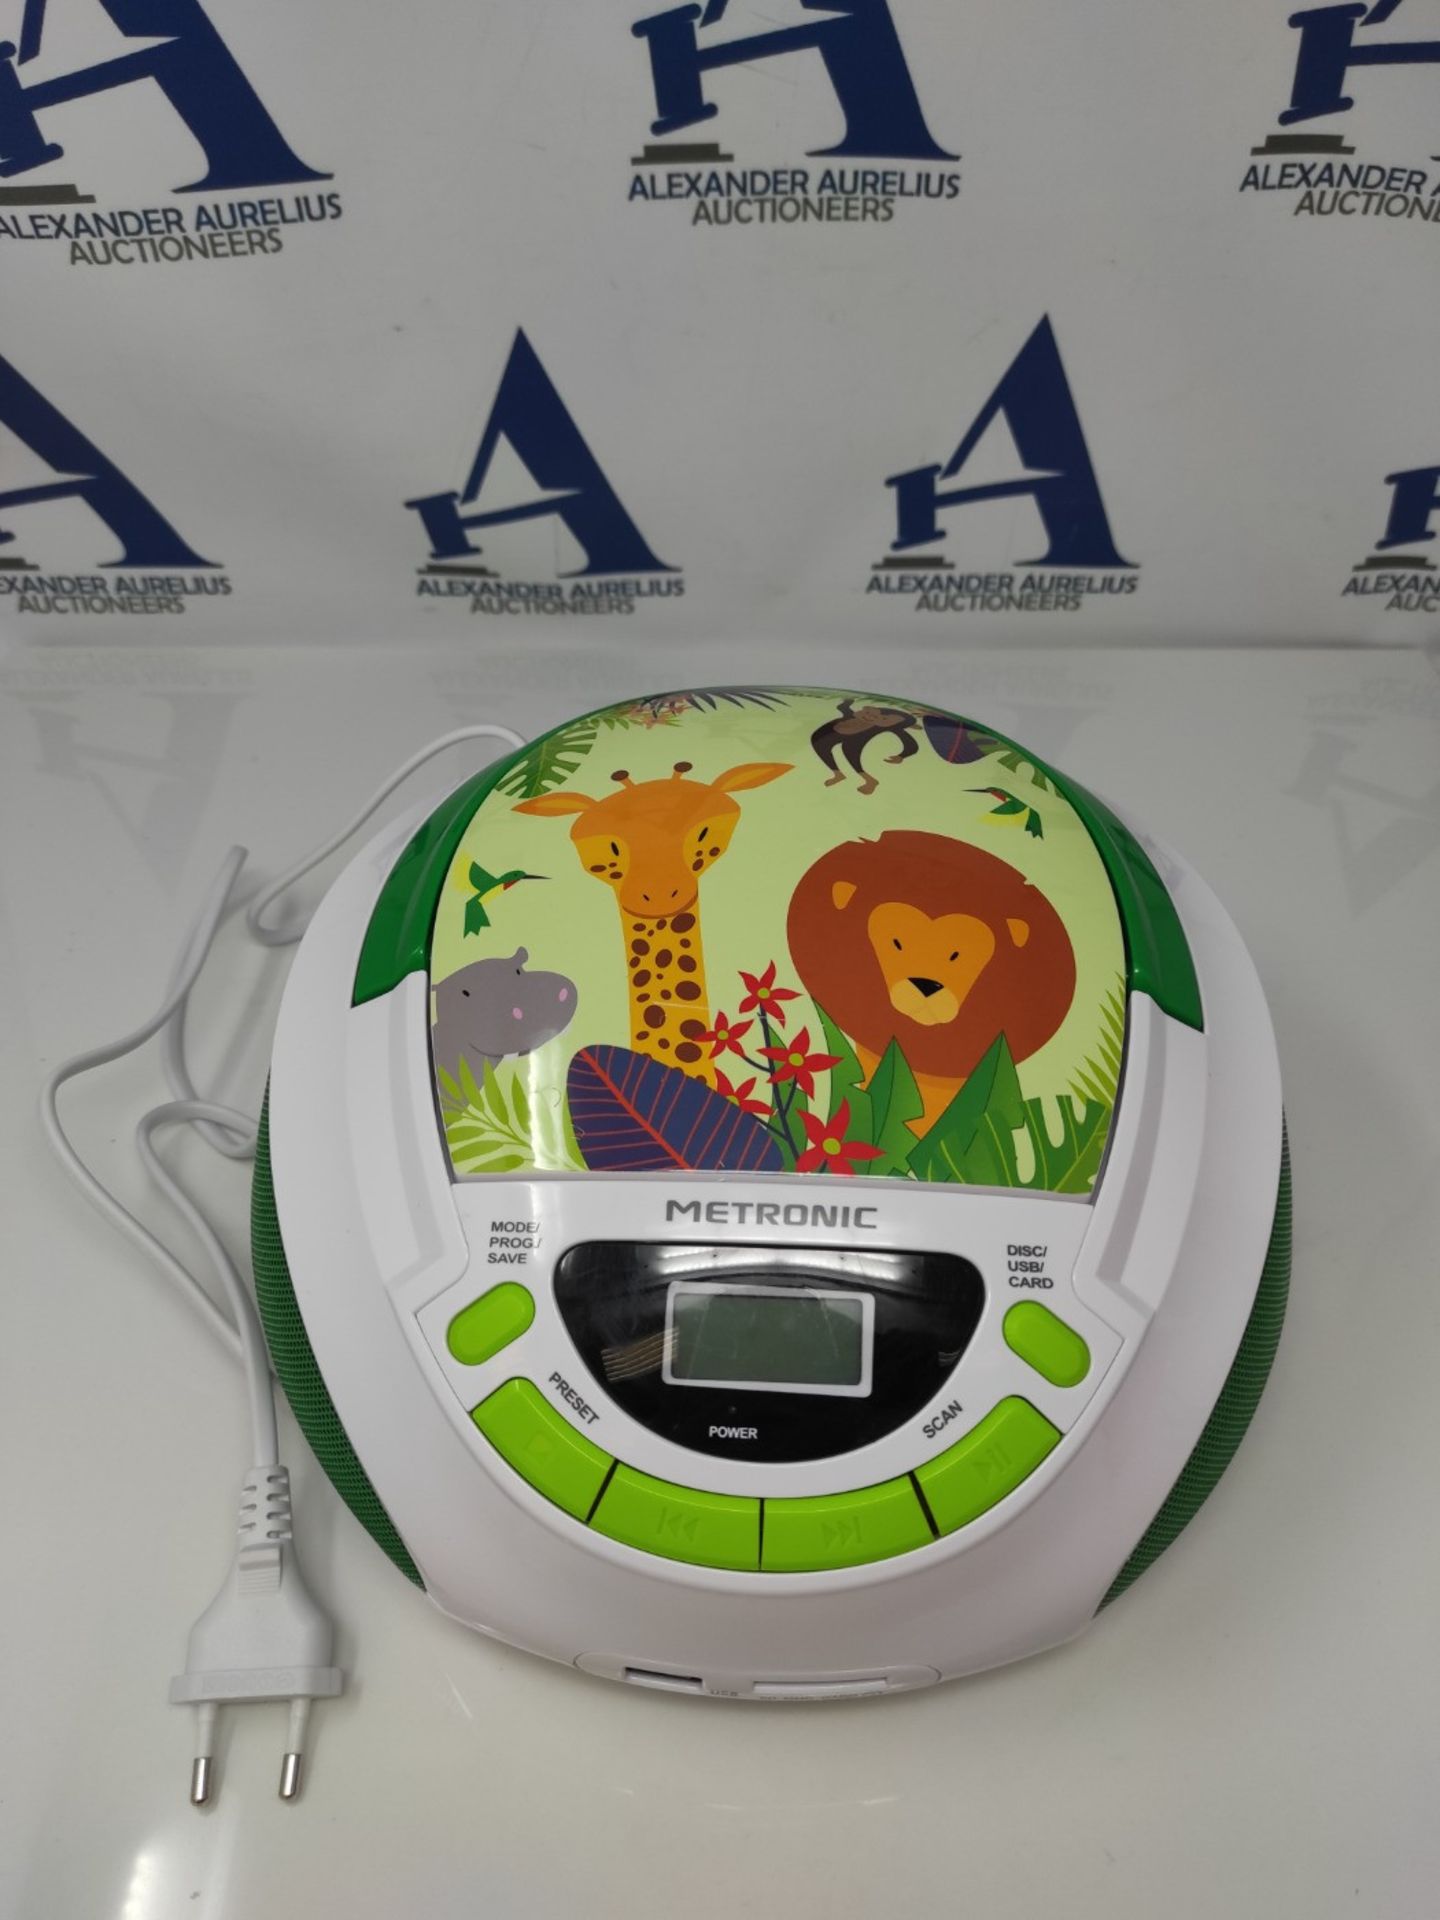 RRP £50.00 Metronic 477144 CD Player for Children, Jungle, with USB/AUX-IN Port Green/White - Image 3 of 3